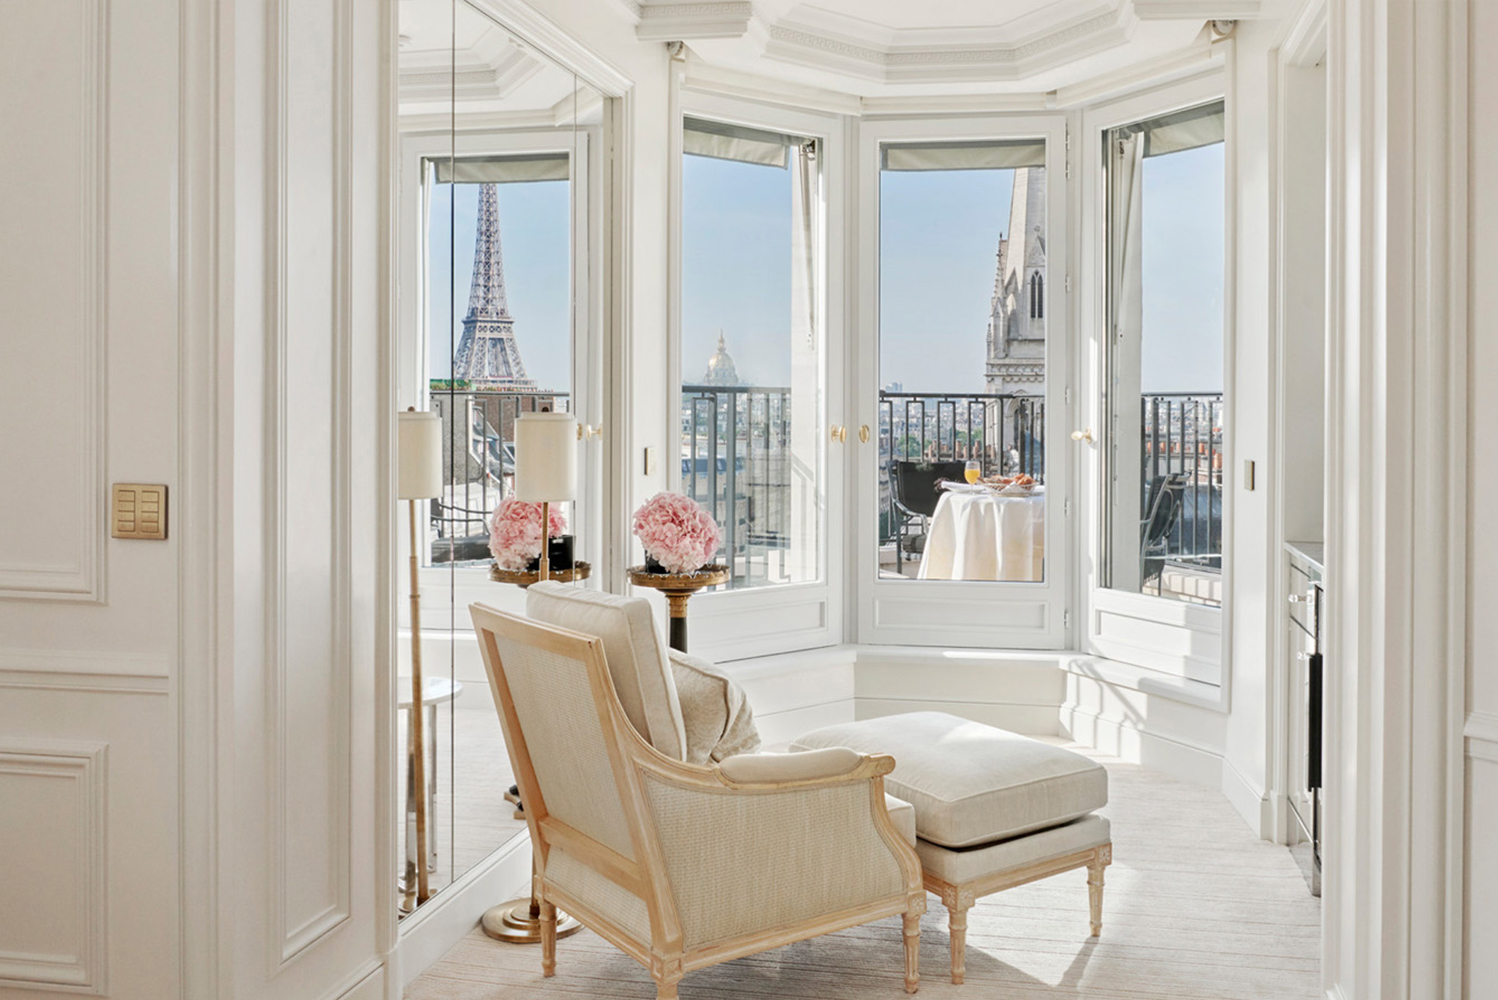 Four Seasons Hotel George V Paris launched the Eiffel Tower Suite and the Parisian Suite 